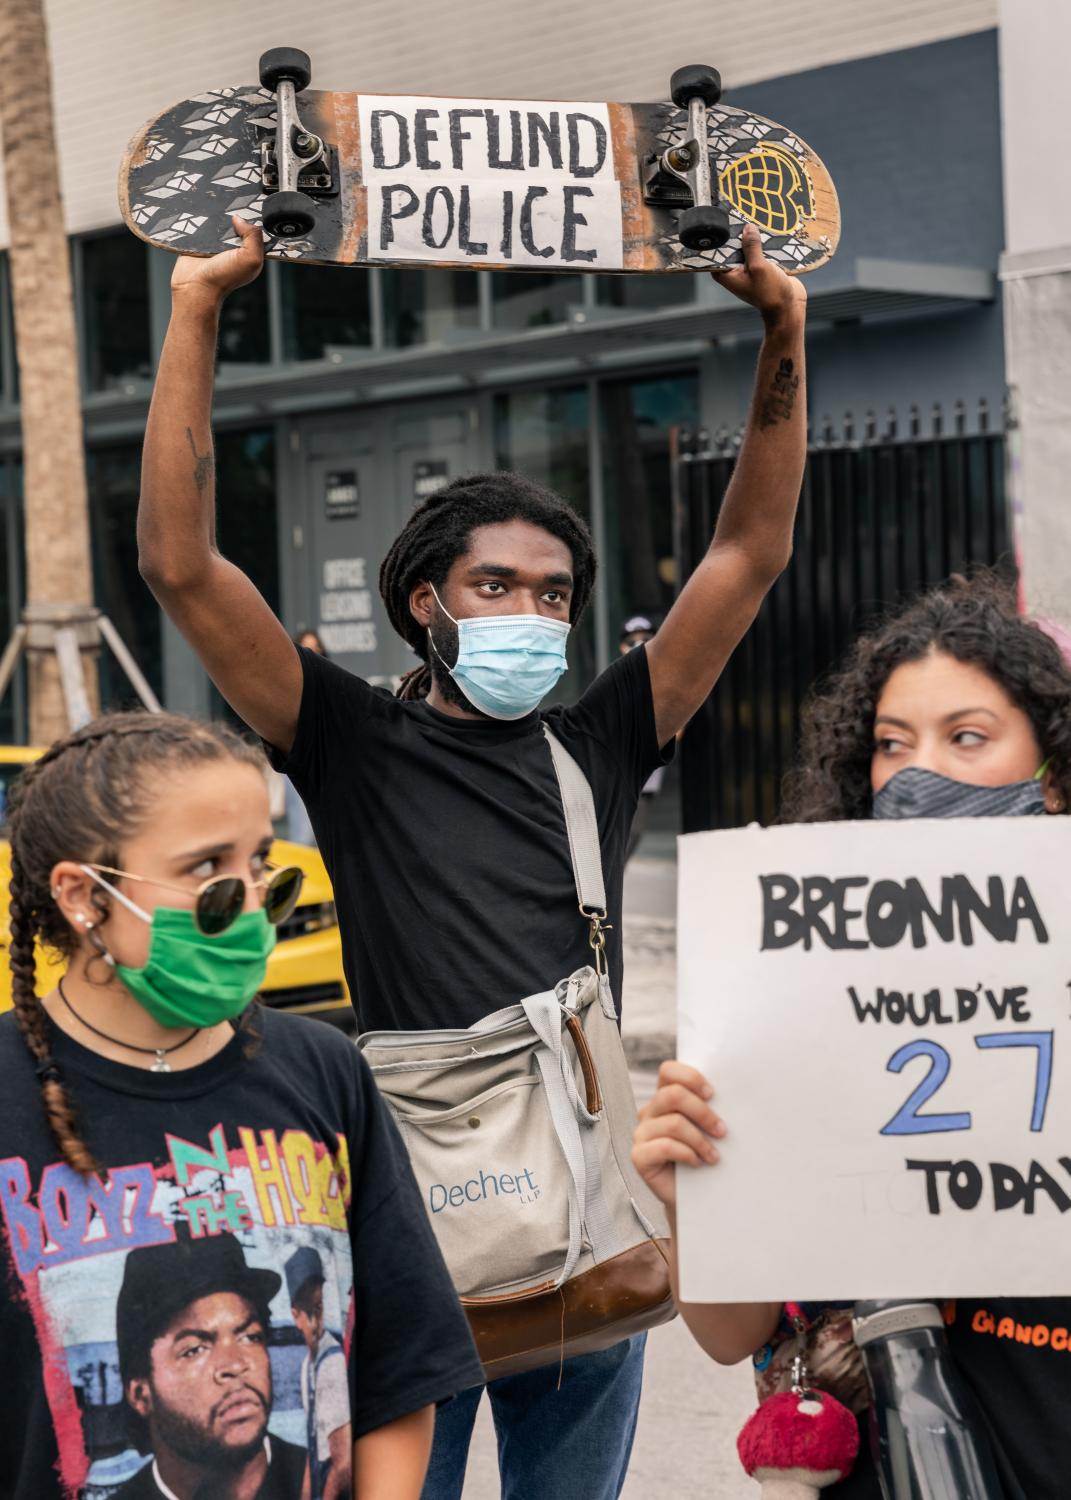 Miami, Black Lives Matter Protests - BLM Protest in Wynwood, Miami, Florida June 5, 2020